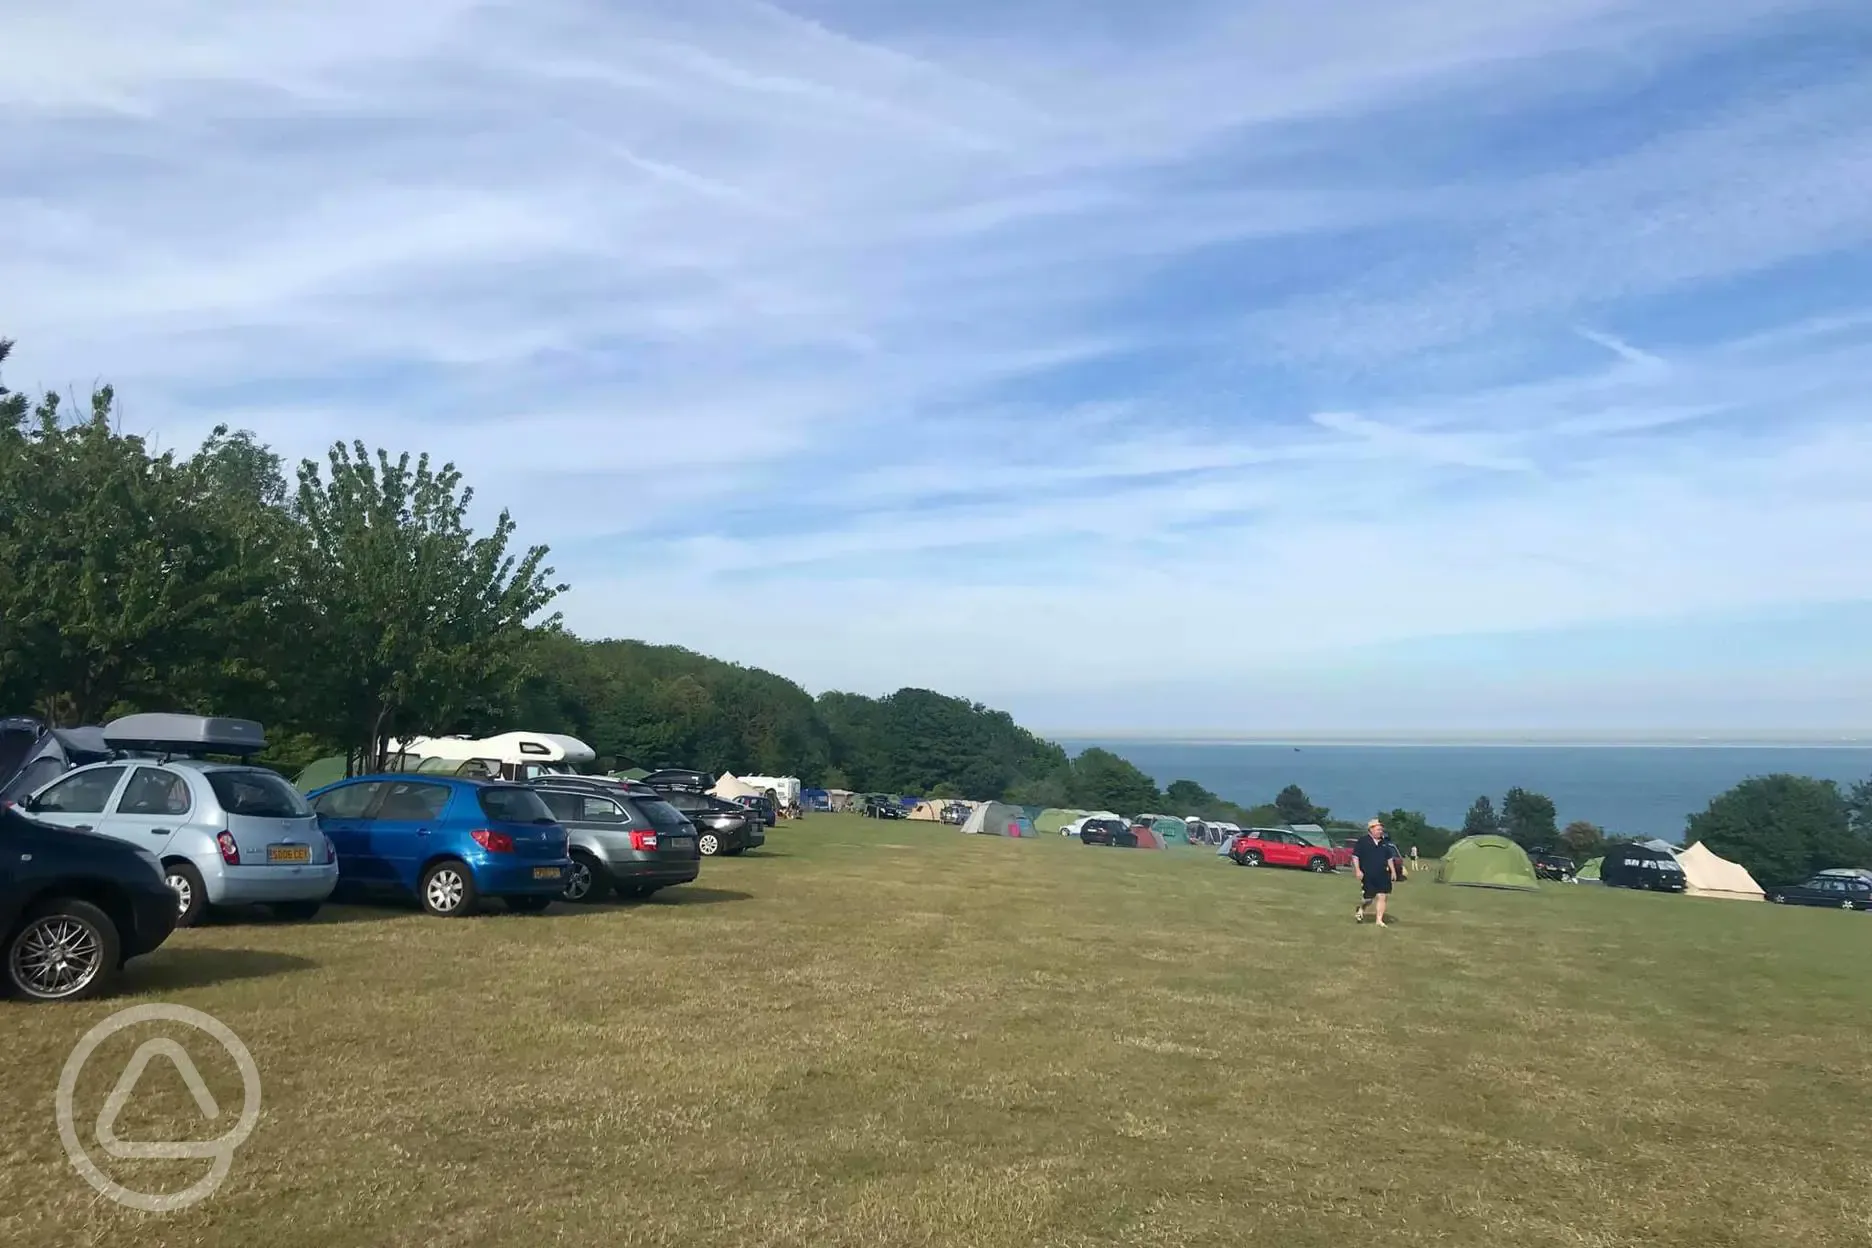 Tent pitches Kingsdown Camping